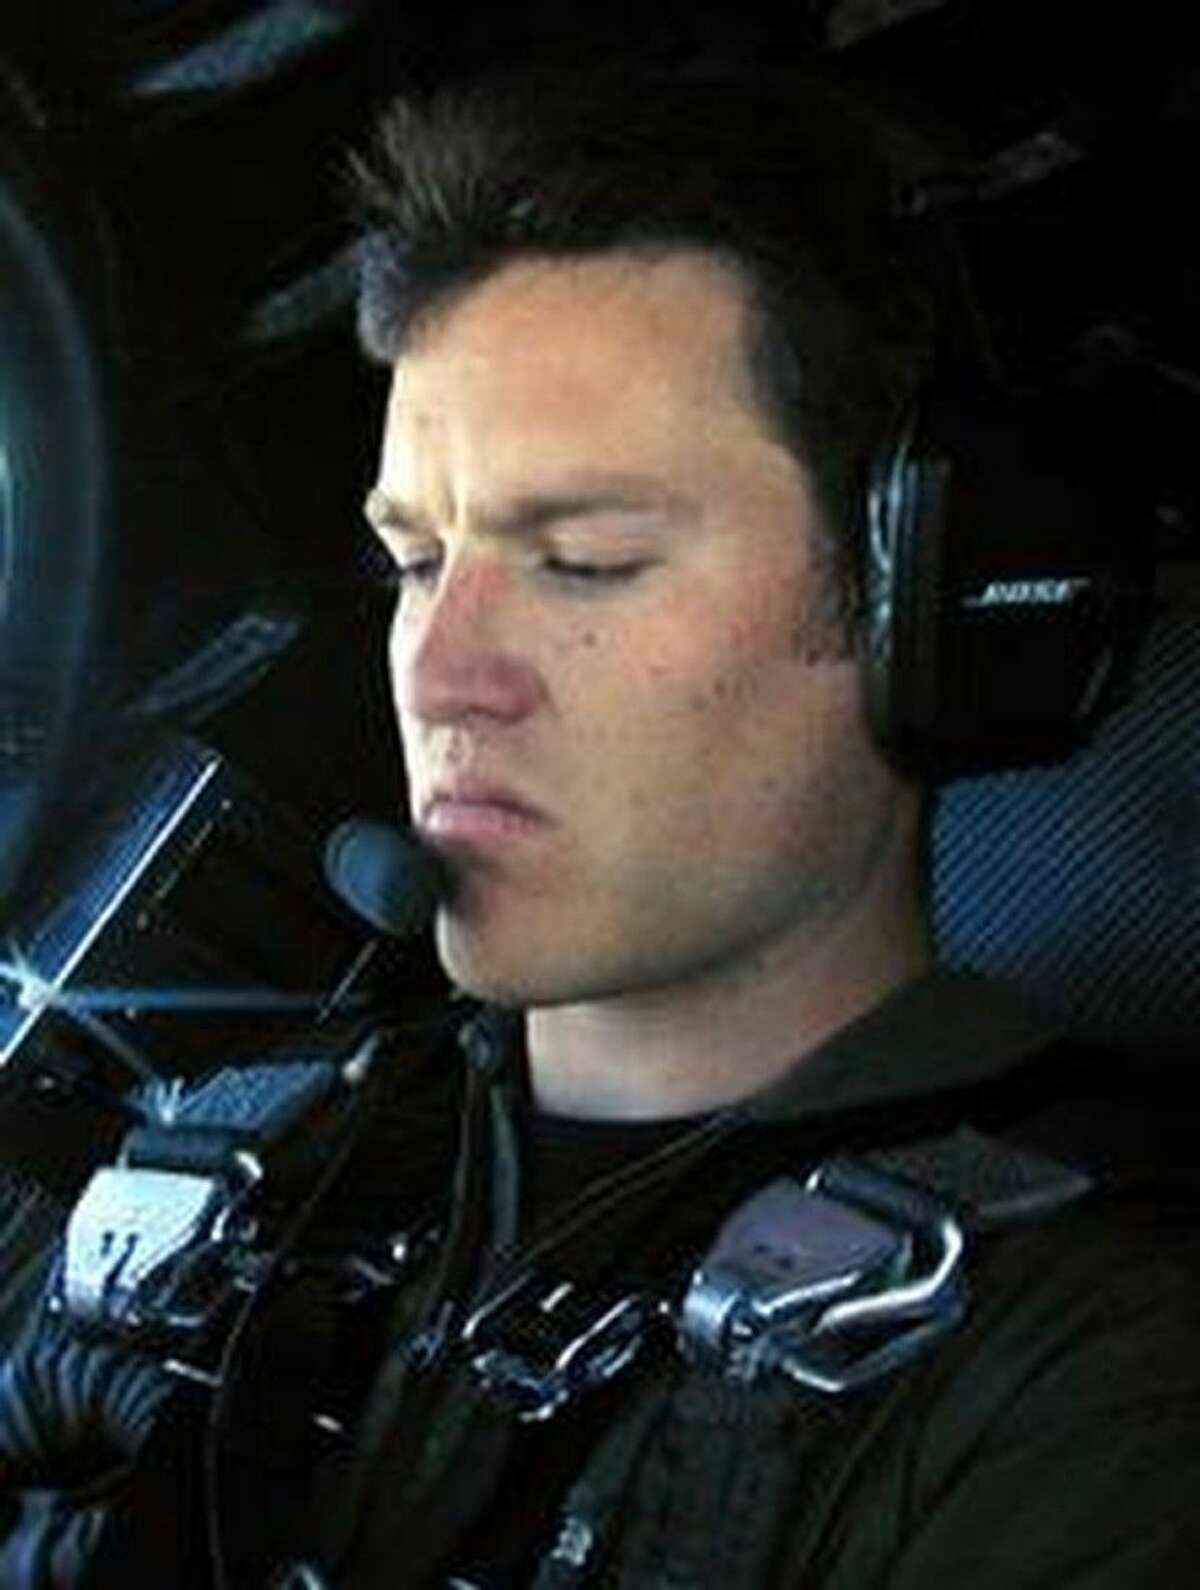 In this undated photo released Saturday, Nov. 1, 2014, by Scaled Composites, shows Michael Alsbury, who was killed while co-piloting the test flight of Virgin Galactic SpaceShipTwo on Friday, Oct. 31, 2014. The surviving pilot was identified as Peter Siebold, 43.